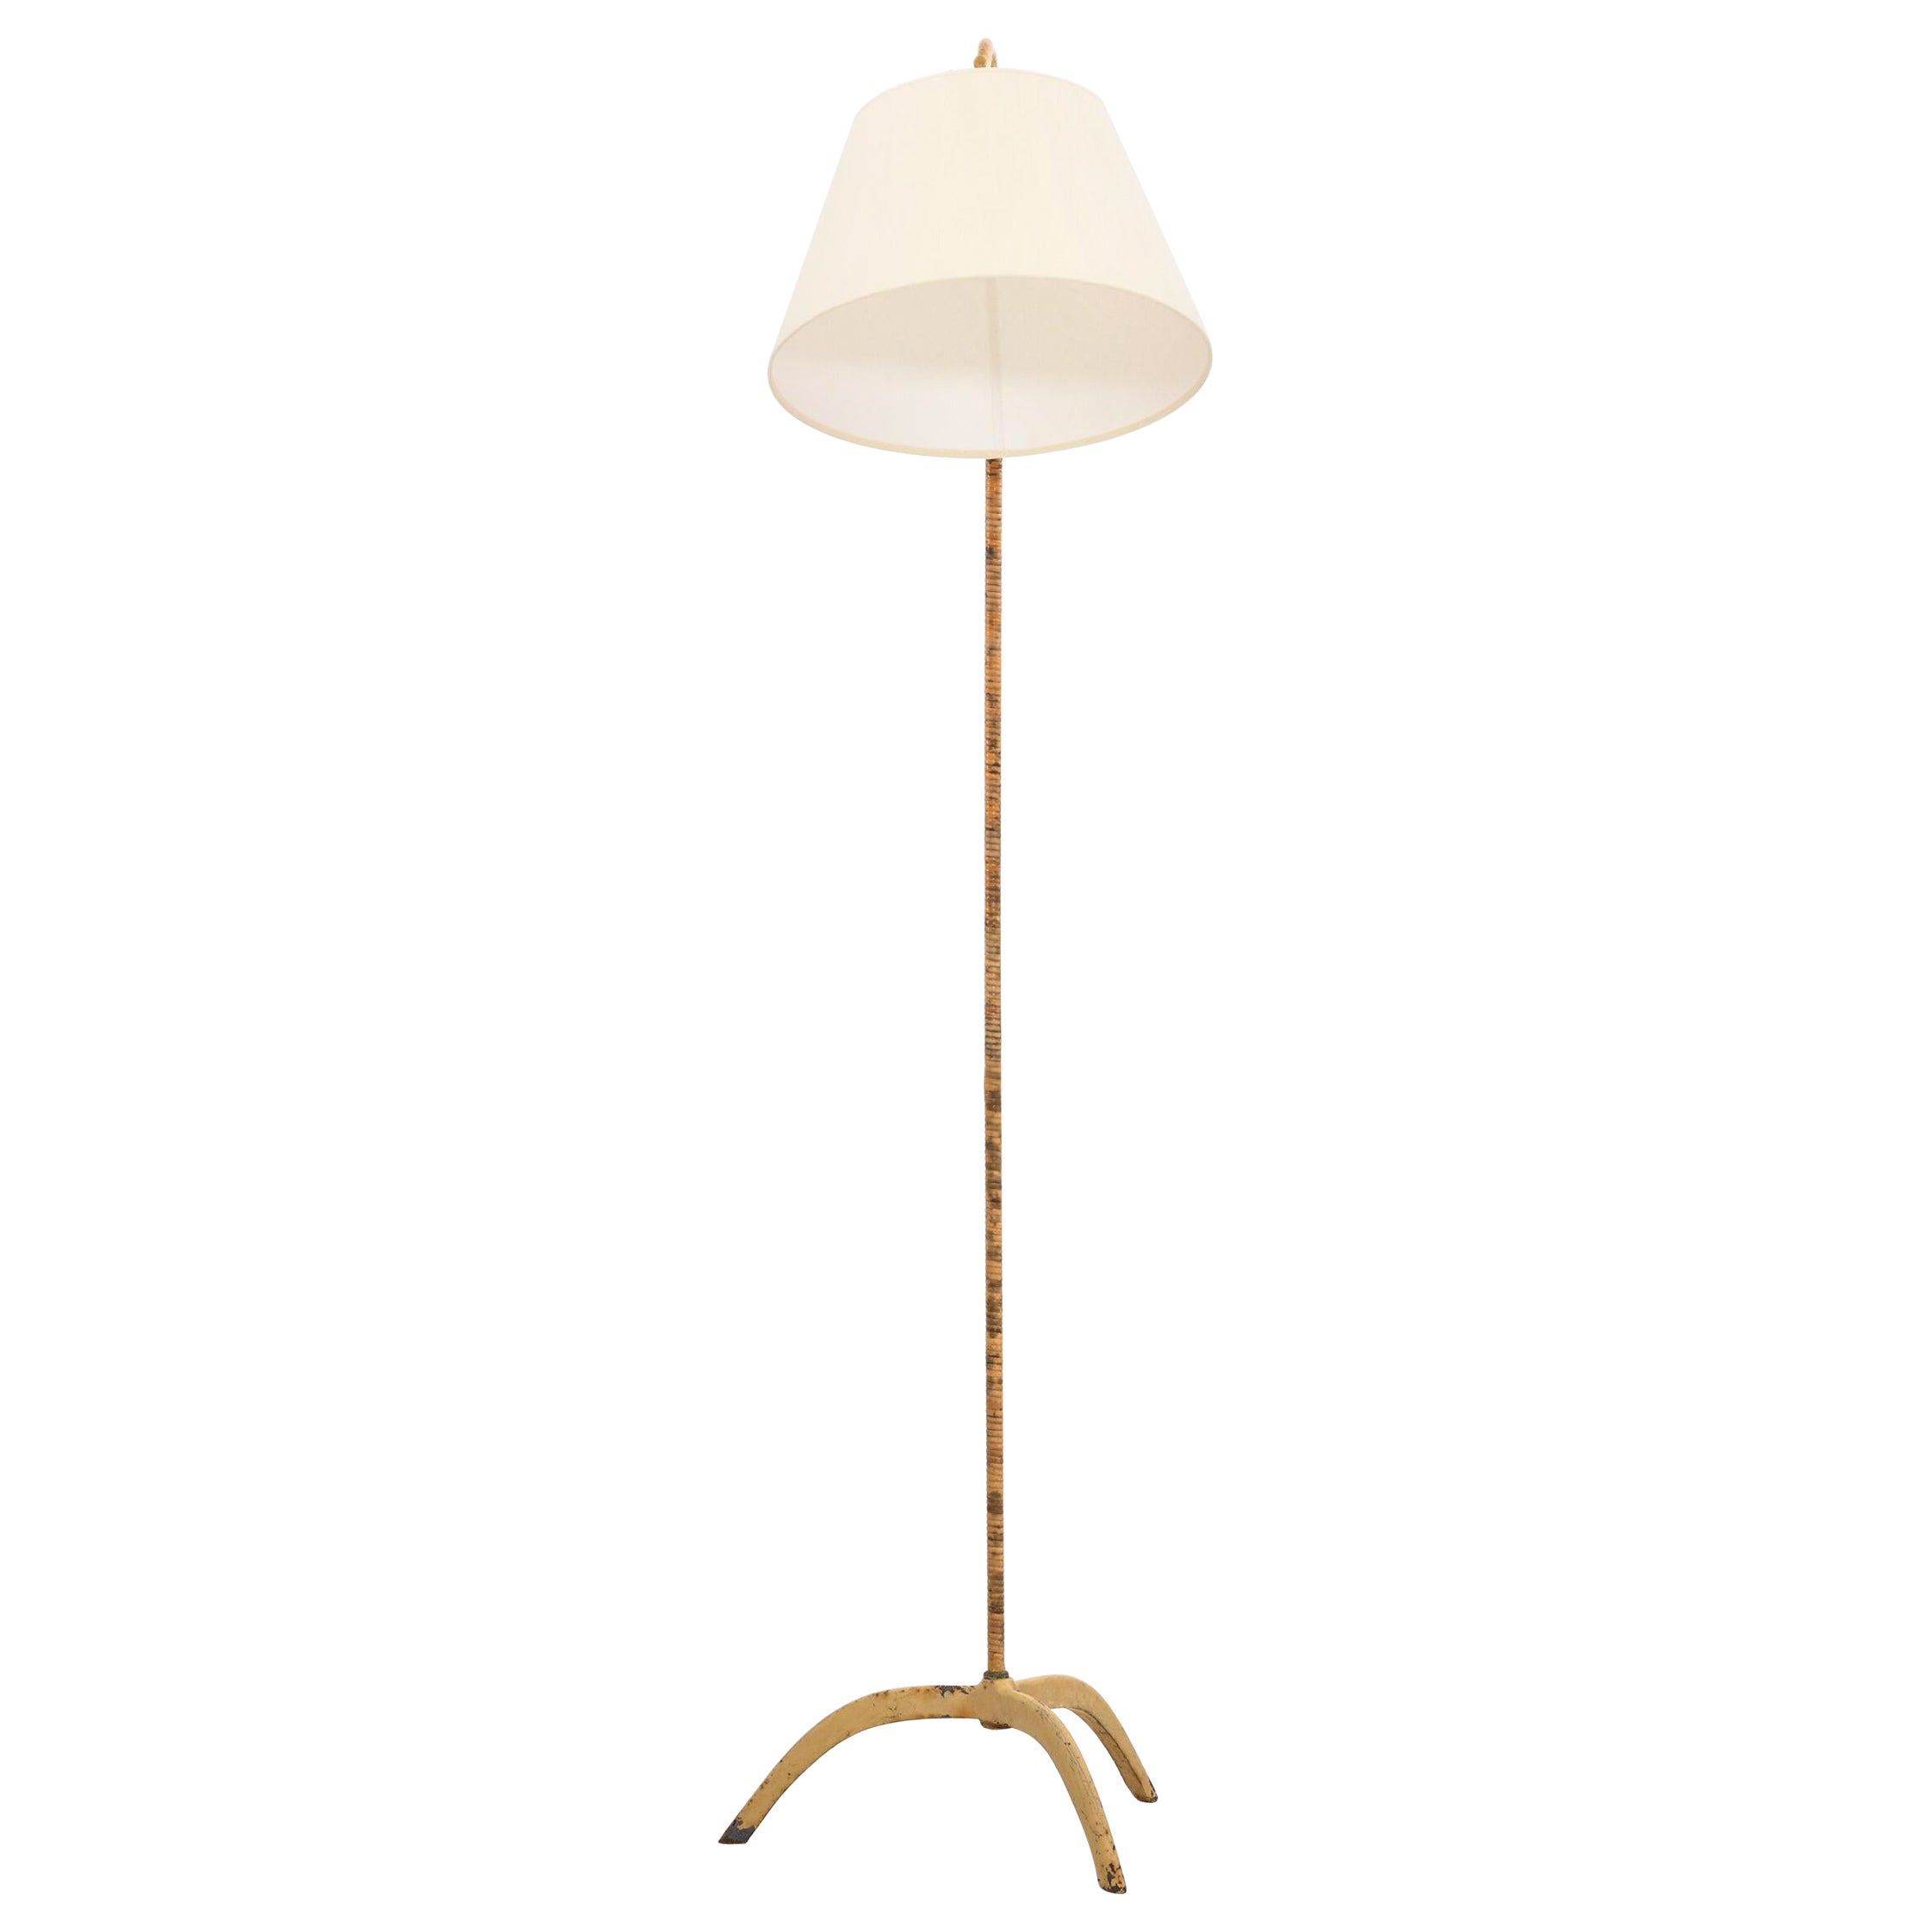 Paavo Tynell Floor Lamp Model 9609 Produced by Taito Oy